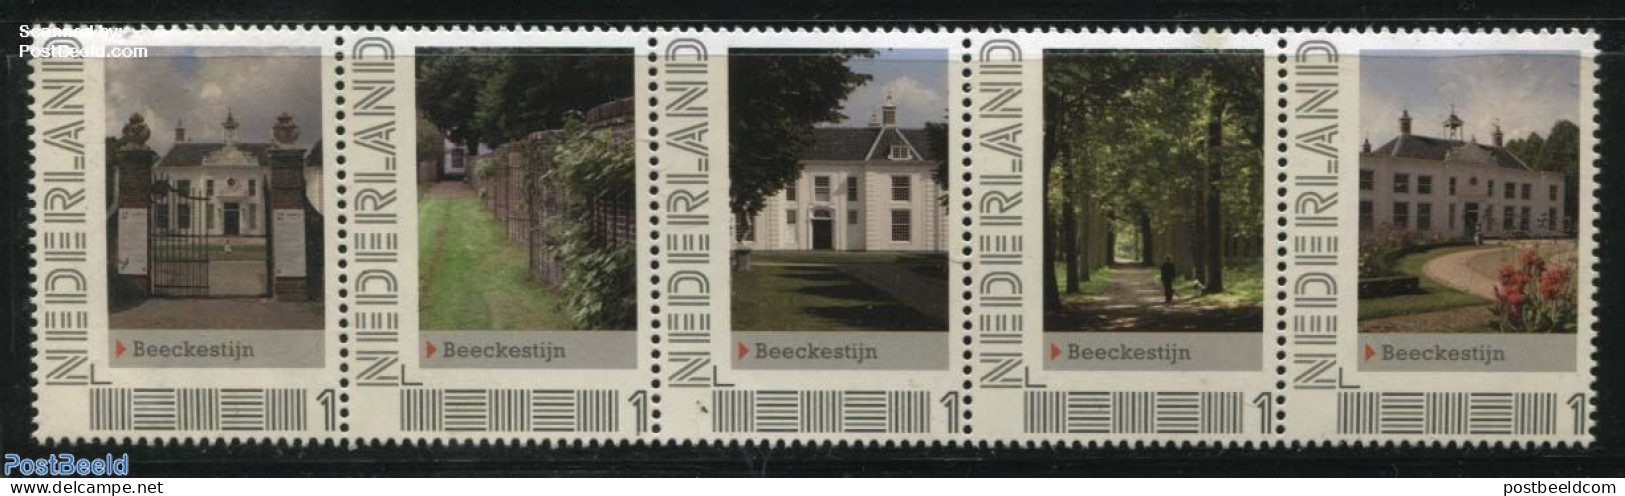 Netherlands - Personal Stamps TNT/PNL 2012 Beeckestijn 5V [::::], Mint NH, Nature - Trees & Forests - Castles & Fortif.. - Rotary, Club Leones